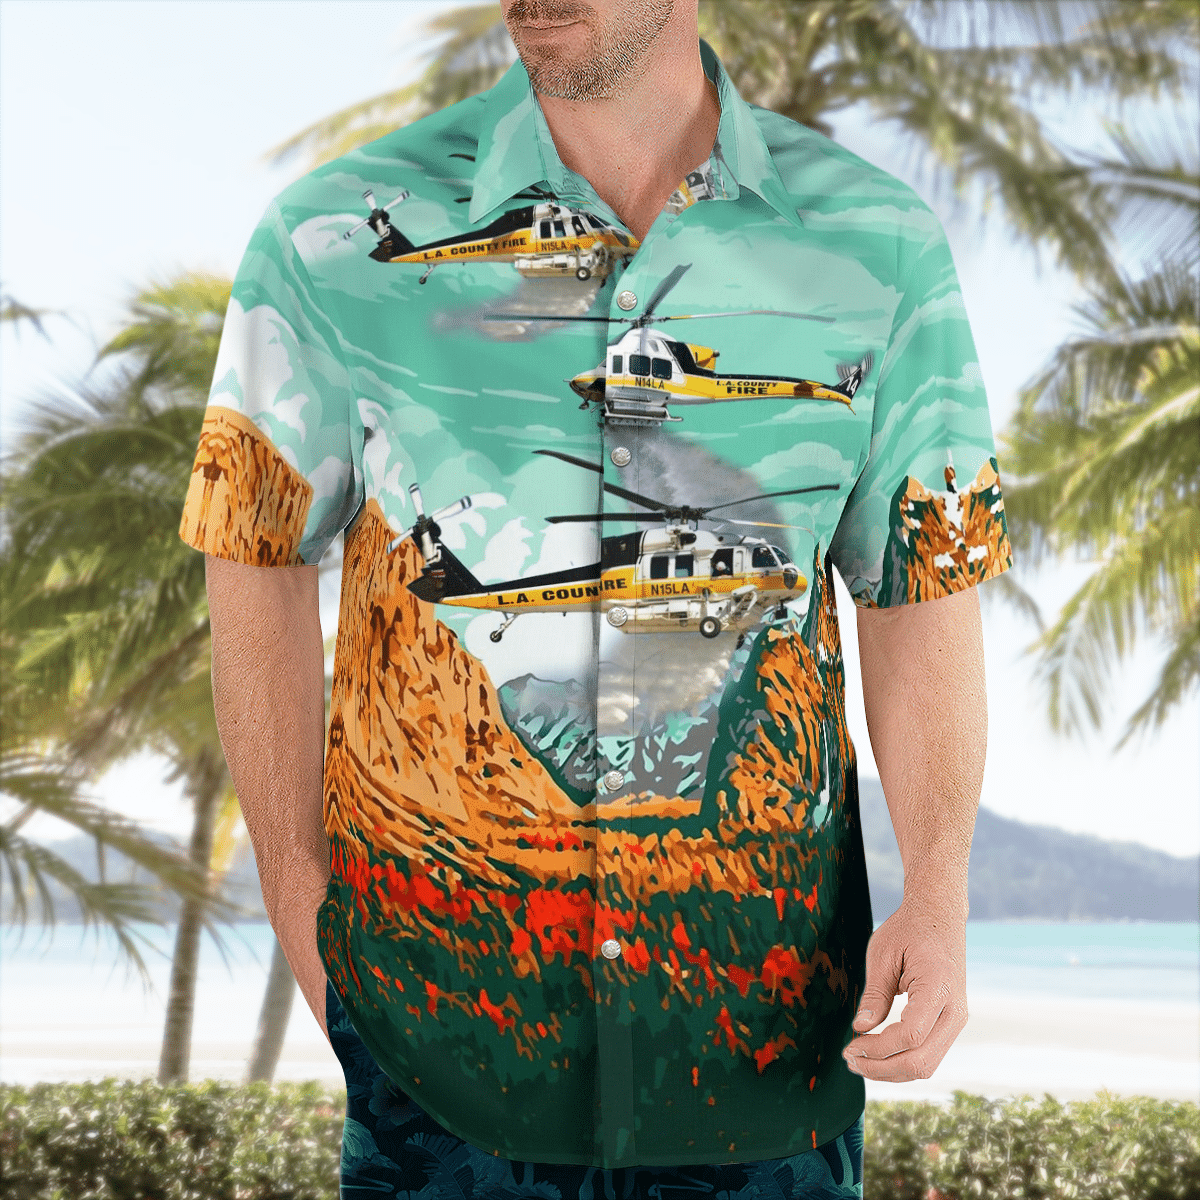 There are several styles of beach and Hawaiian shorts and tops to choose from 80